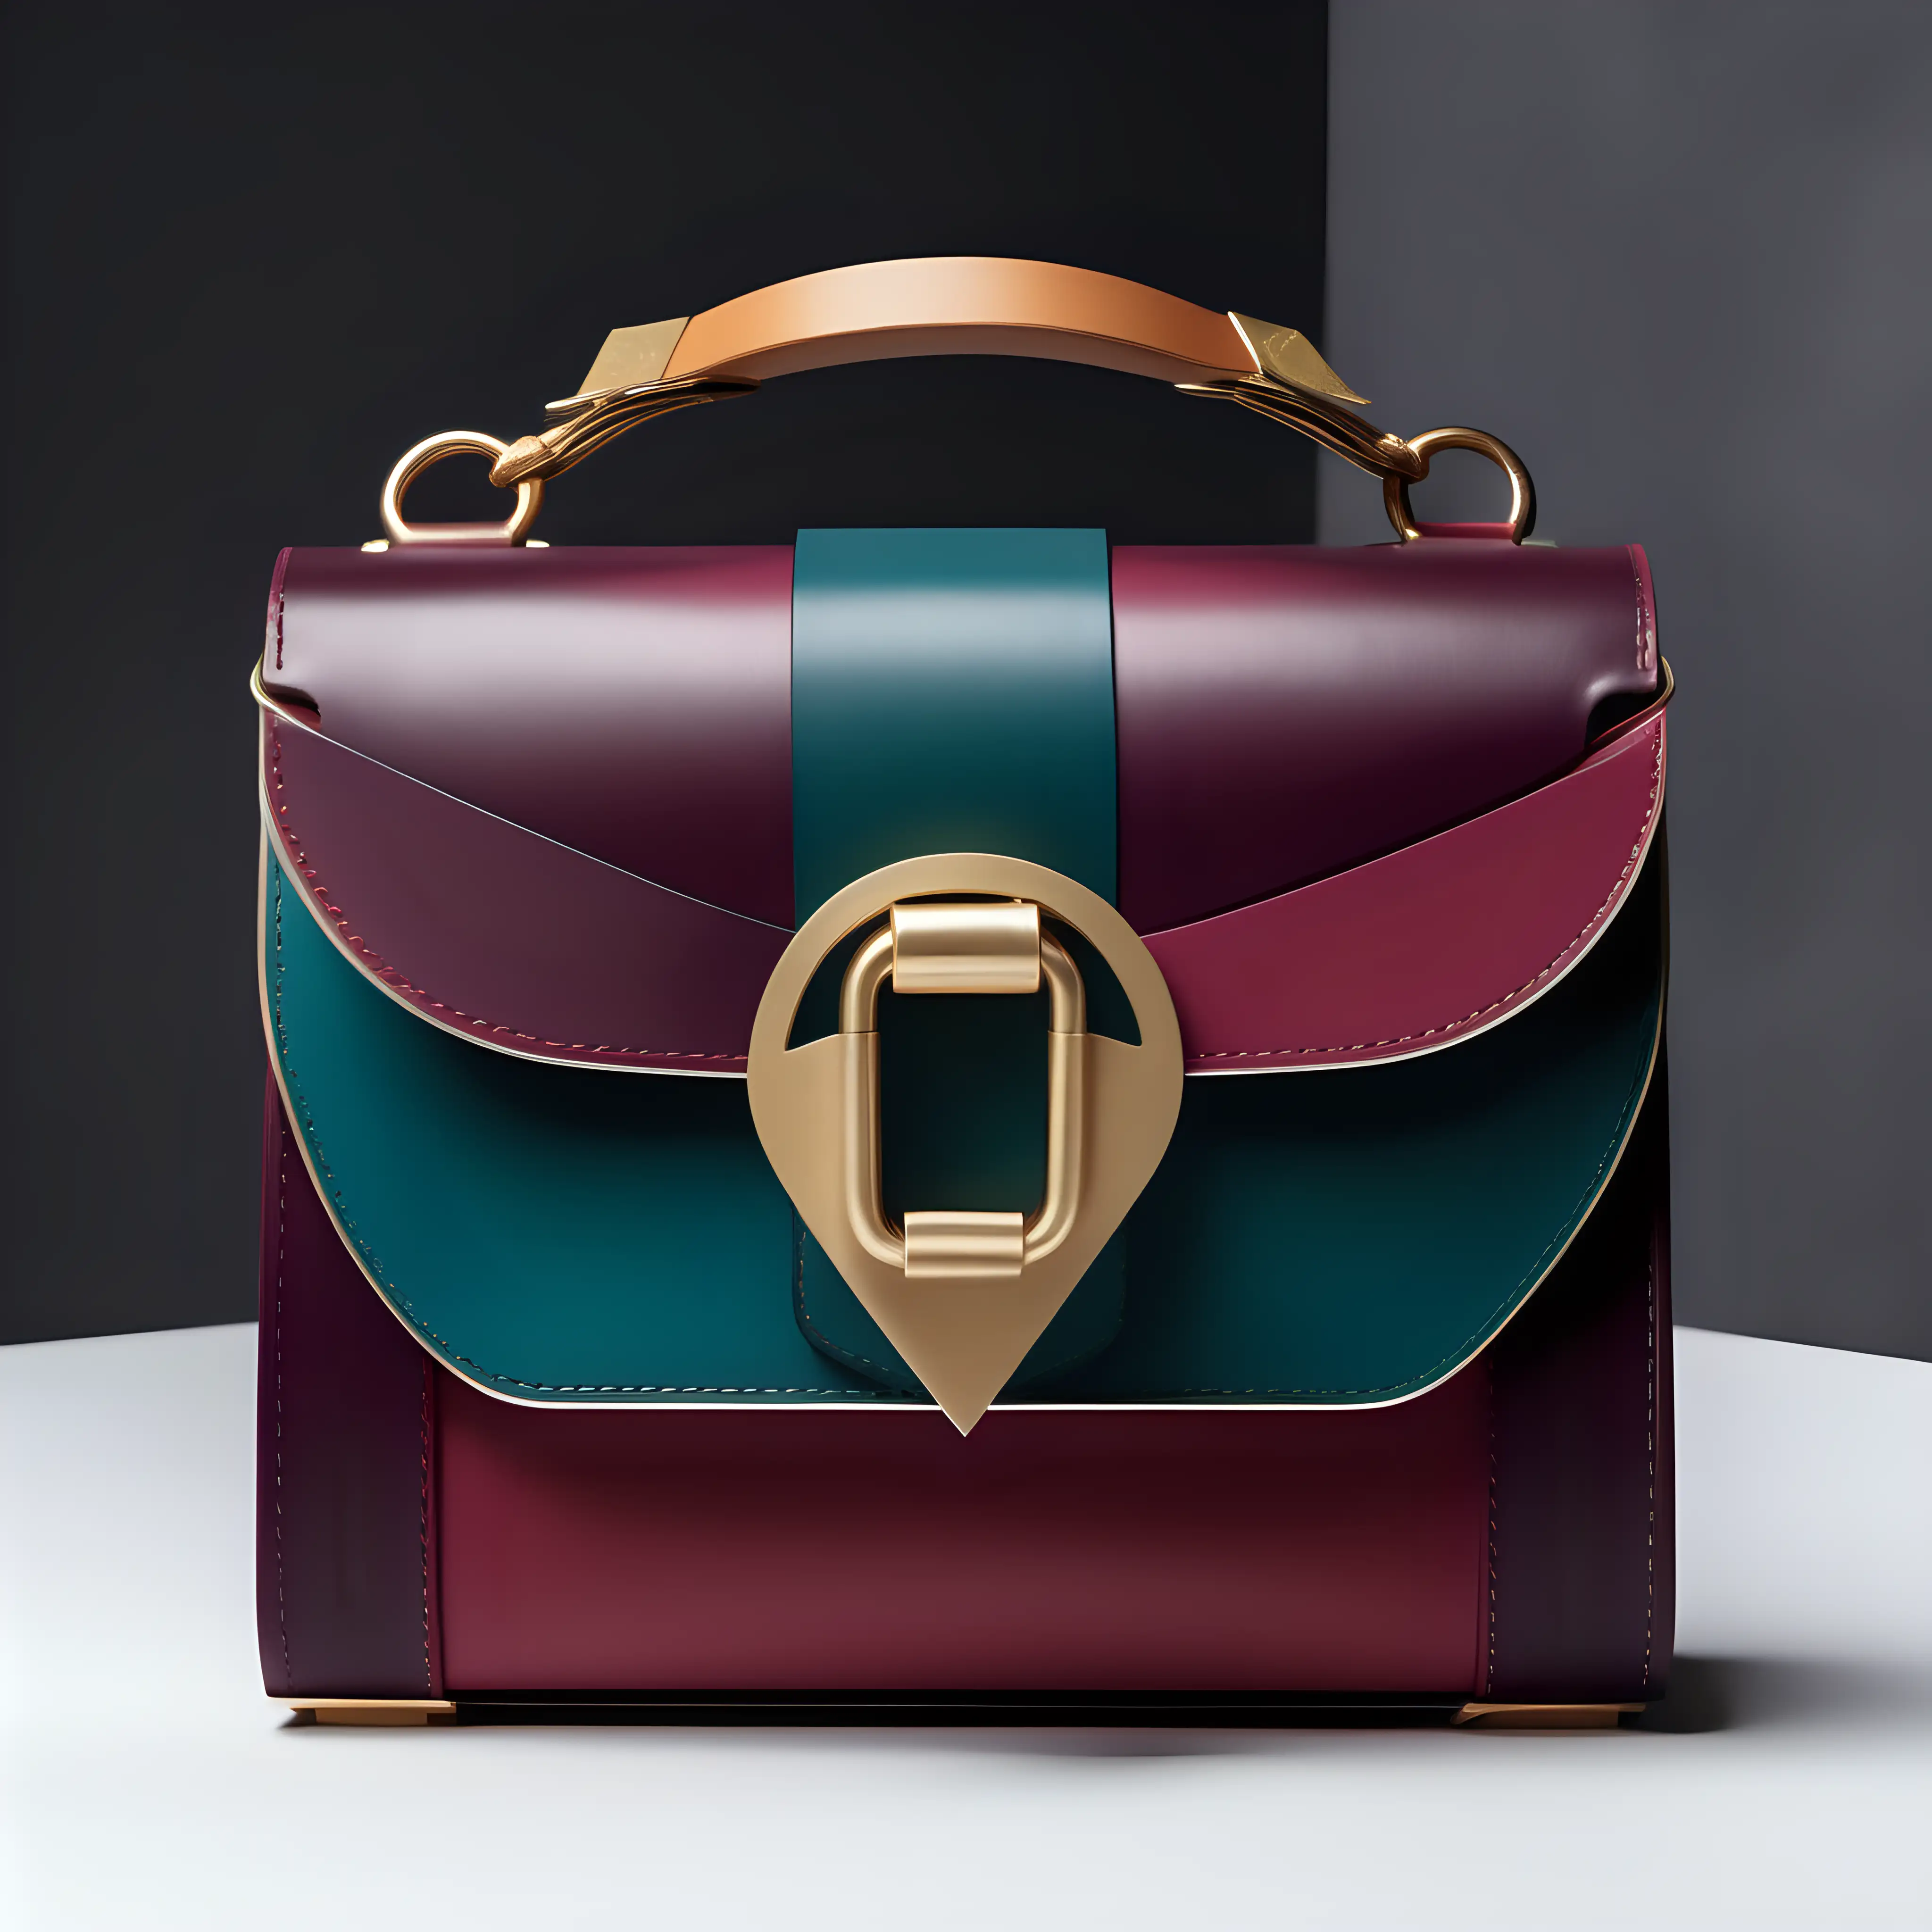 Art Nouveau motiv inspired luxury small  bag  leather with flap and metal buckle- geometric shape - frontal view  - inserts color block - Burgundi shades